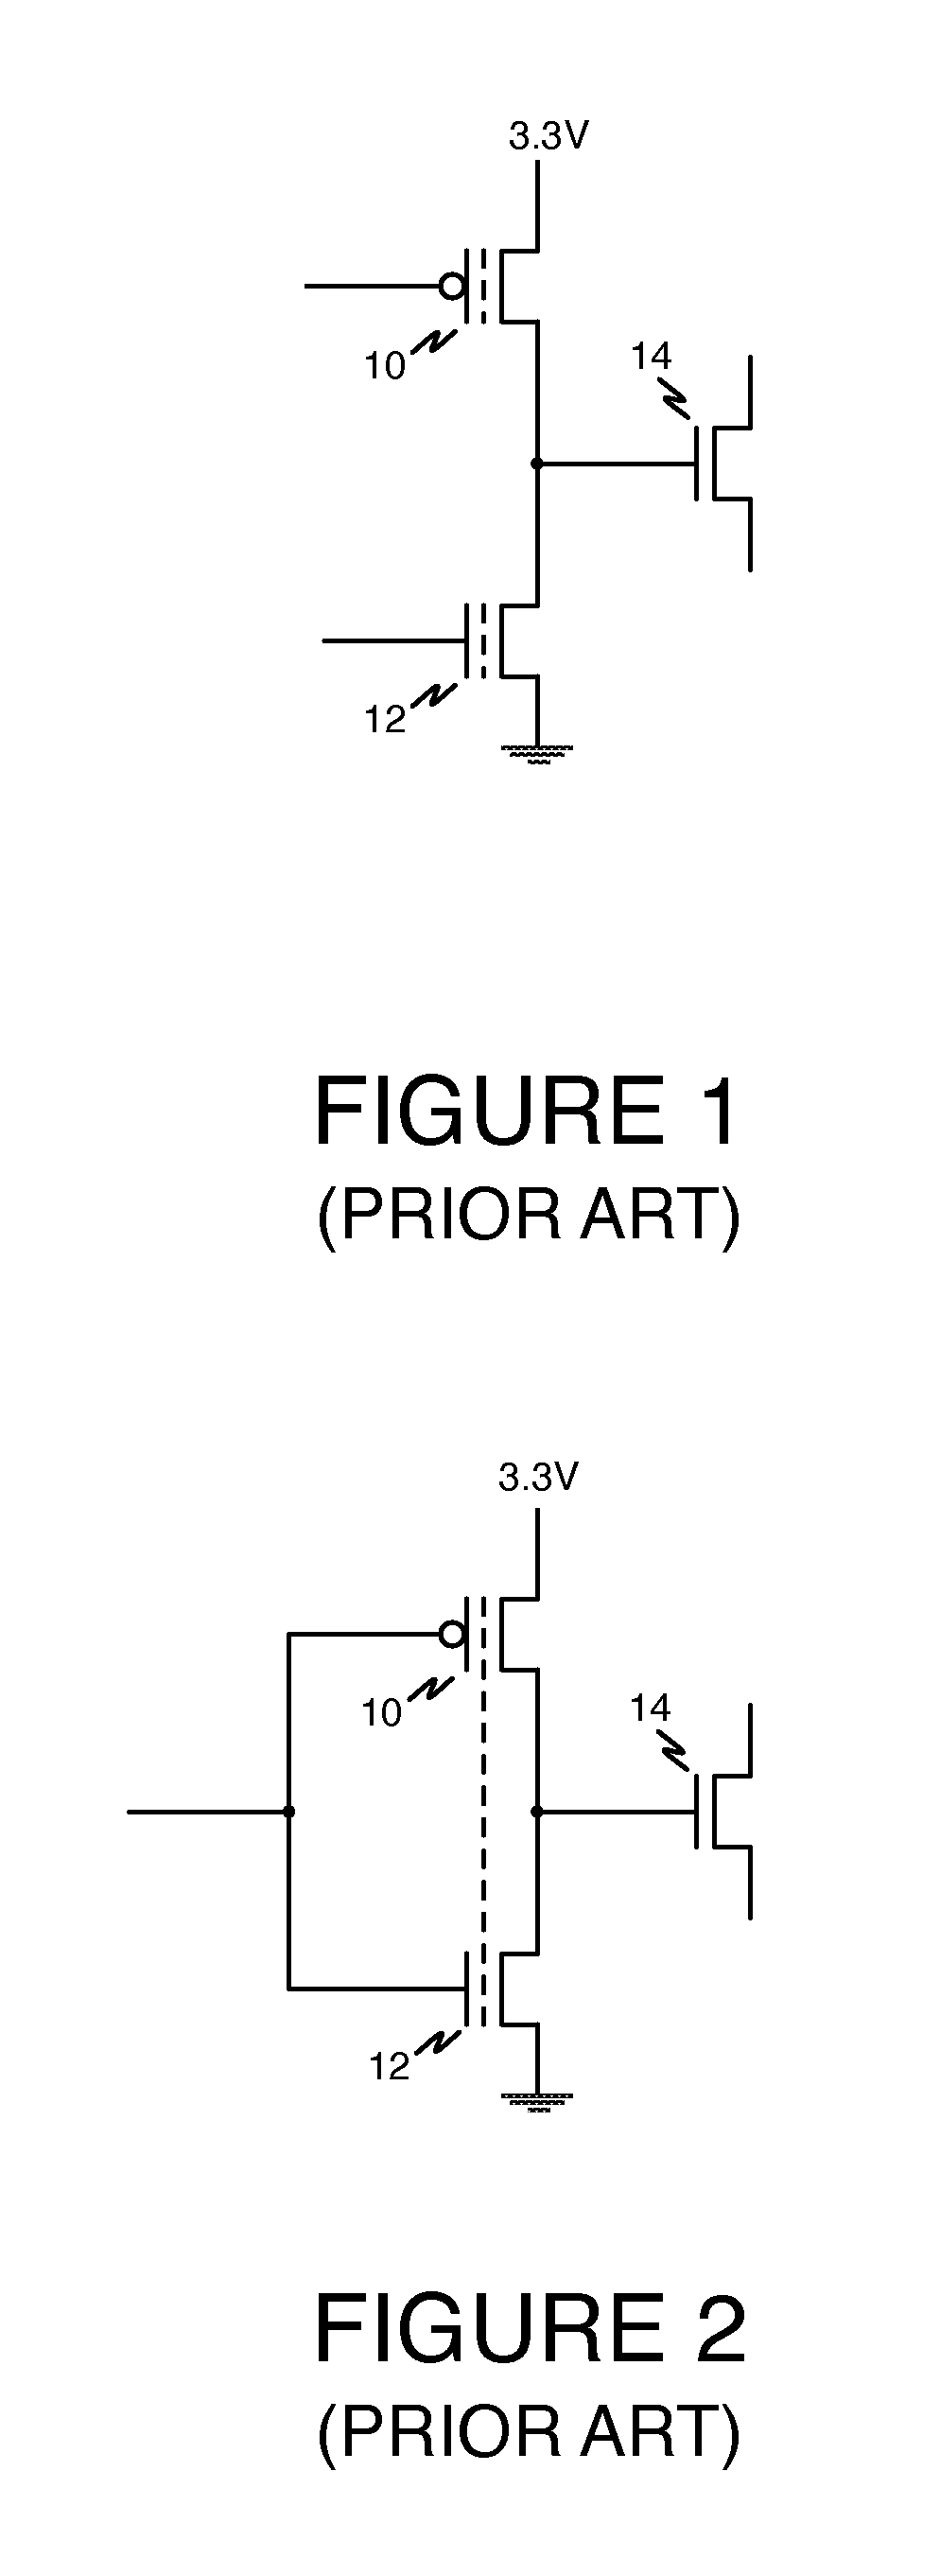 Push-pull programmable logic device cell